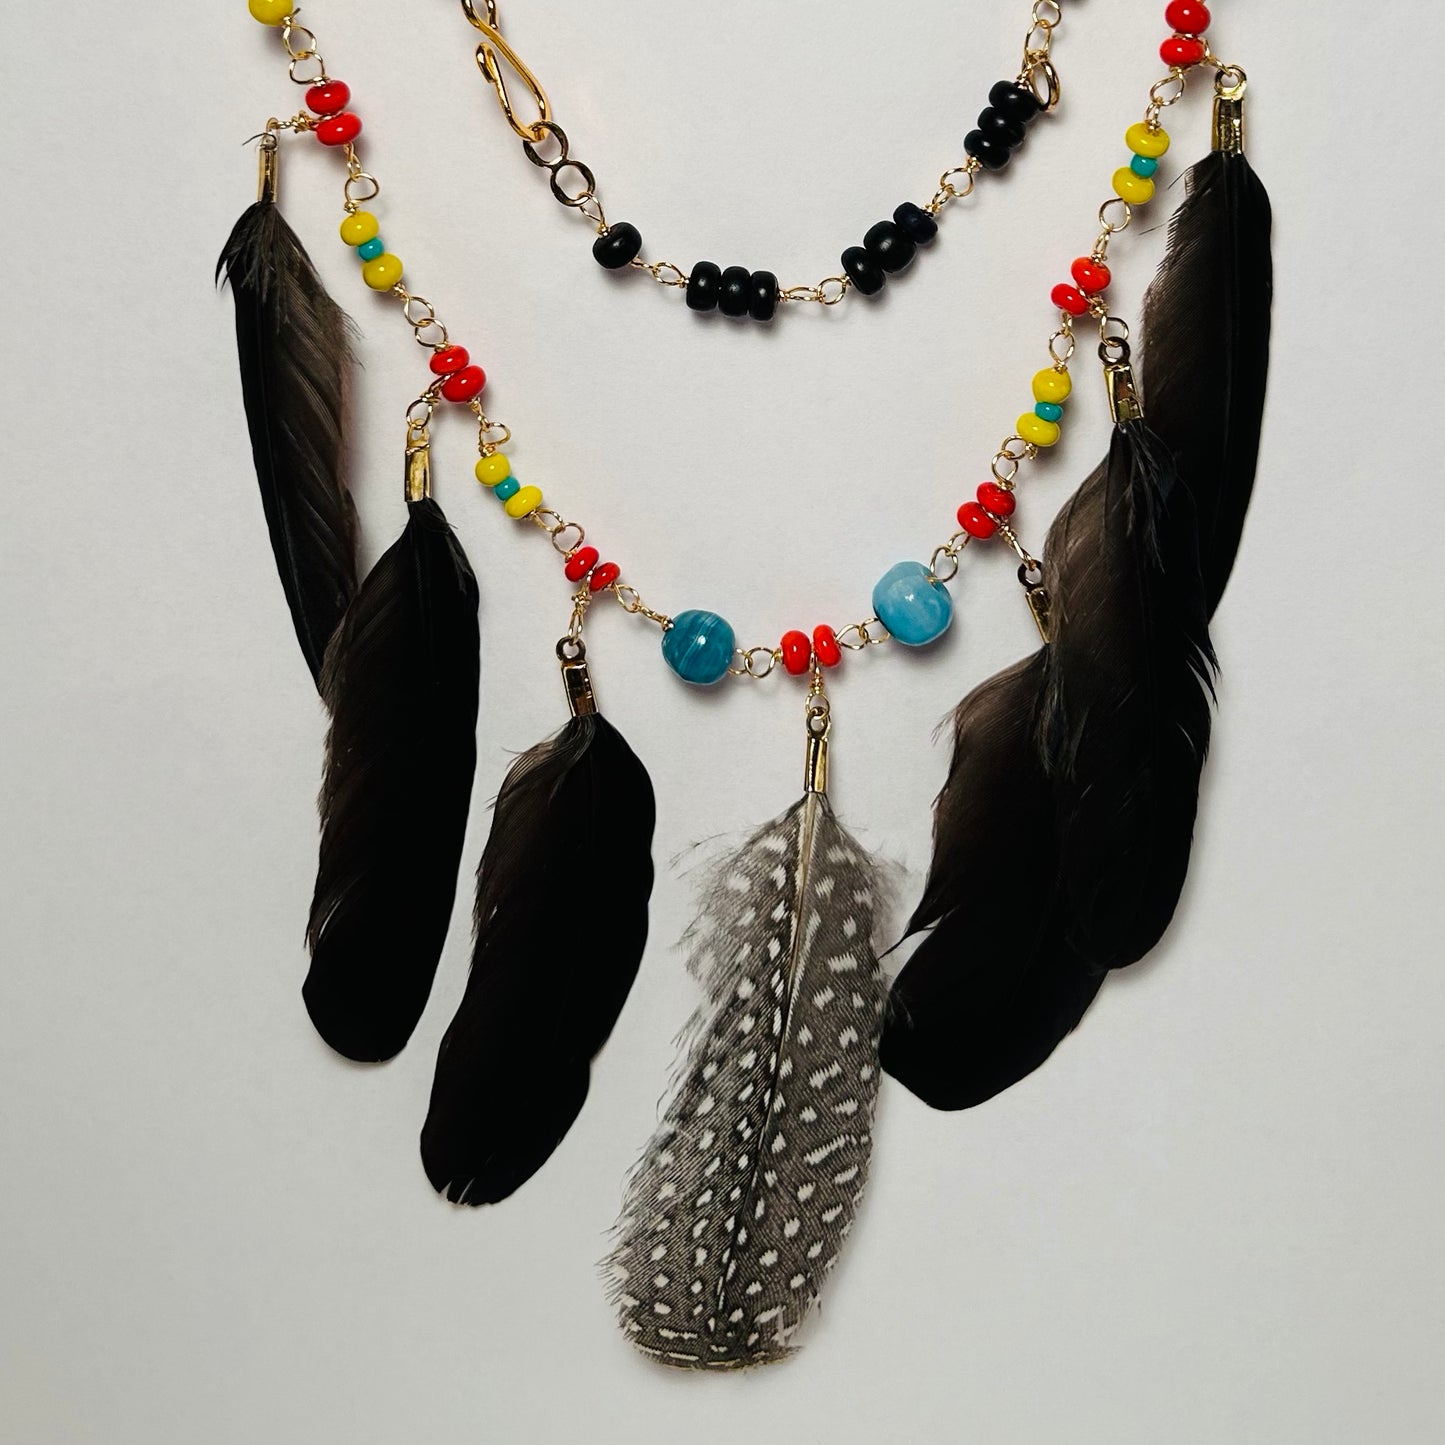 En Route, Feathered & Beaded Necklace